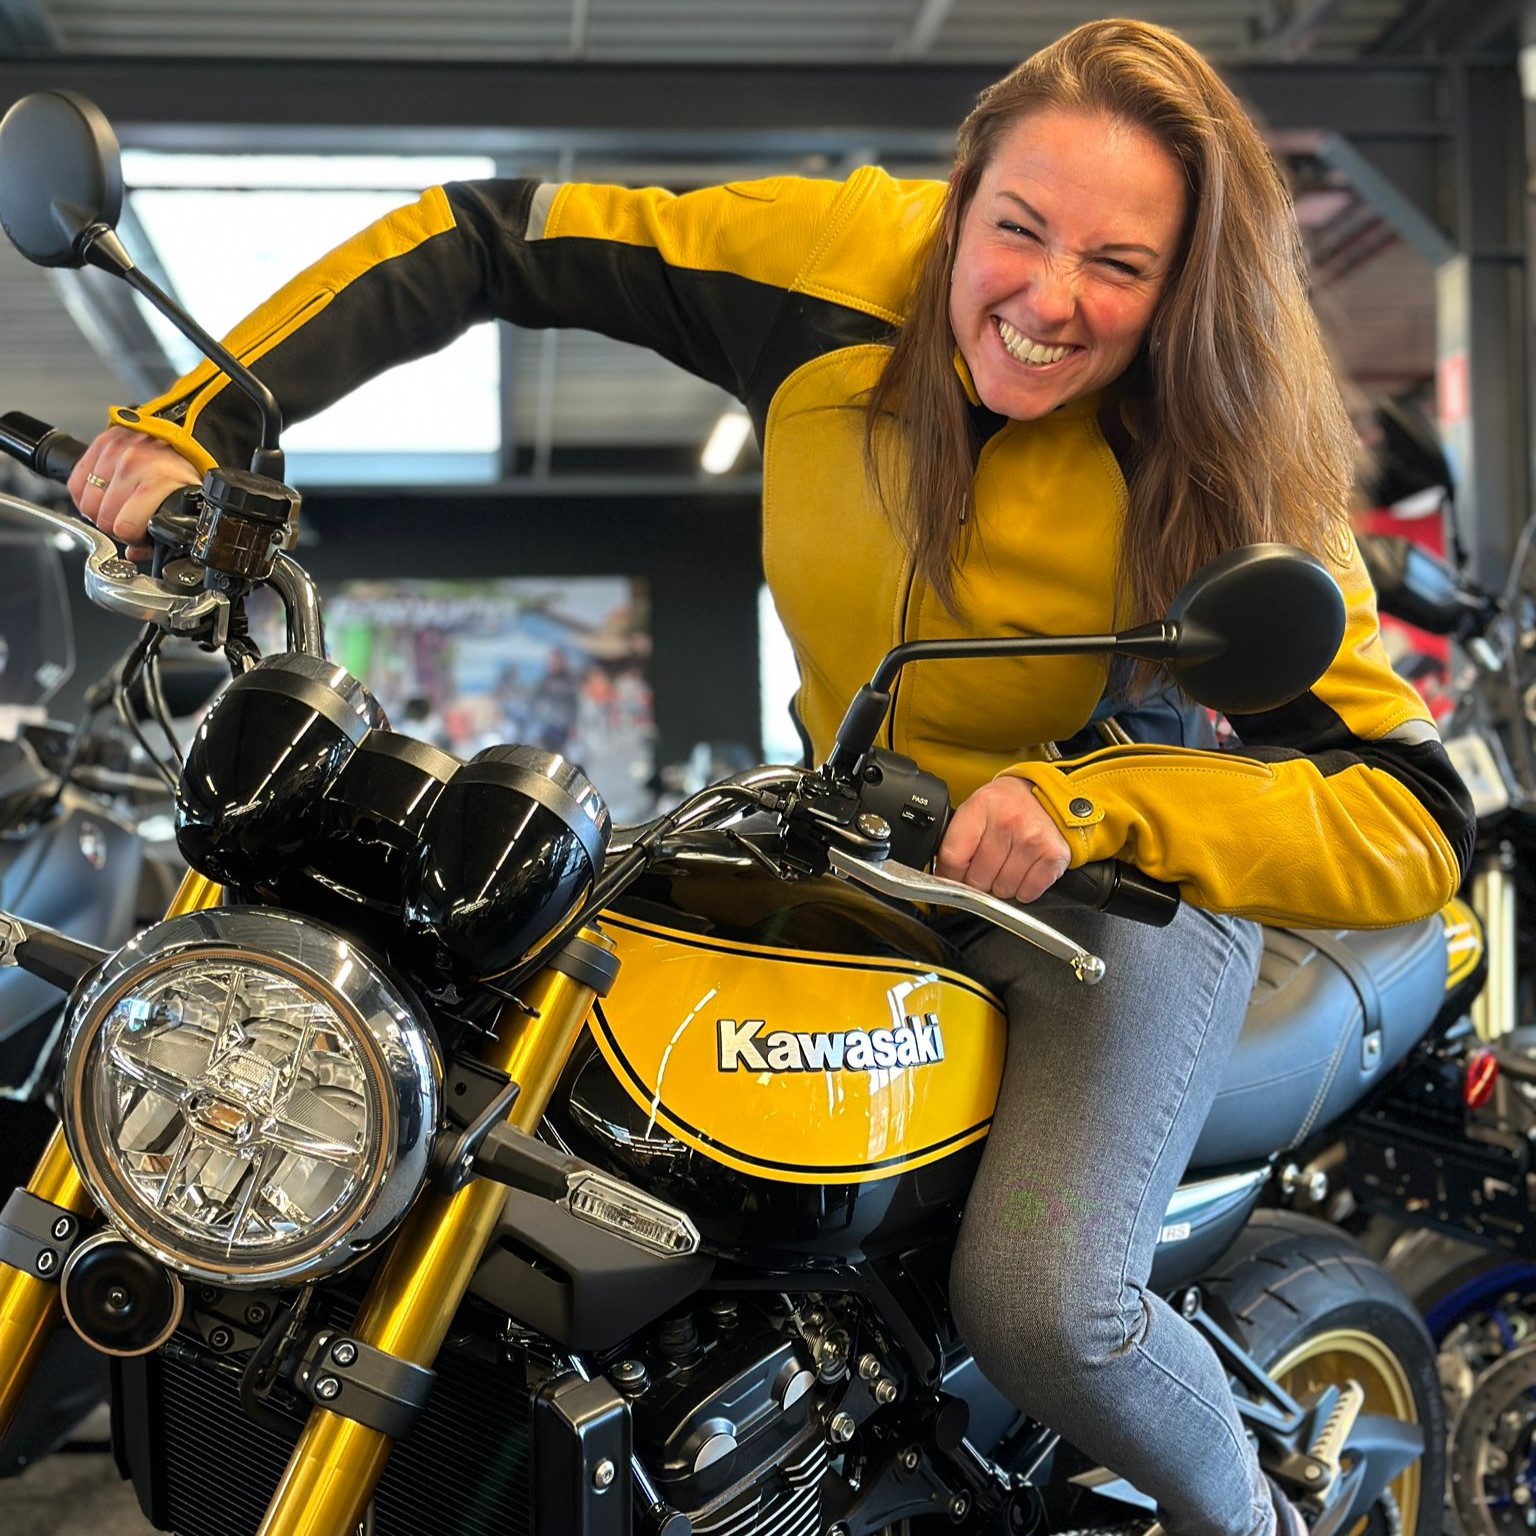 MOTO HENGELO ZONDAG RIDE OUT - LADIES ONLY